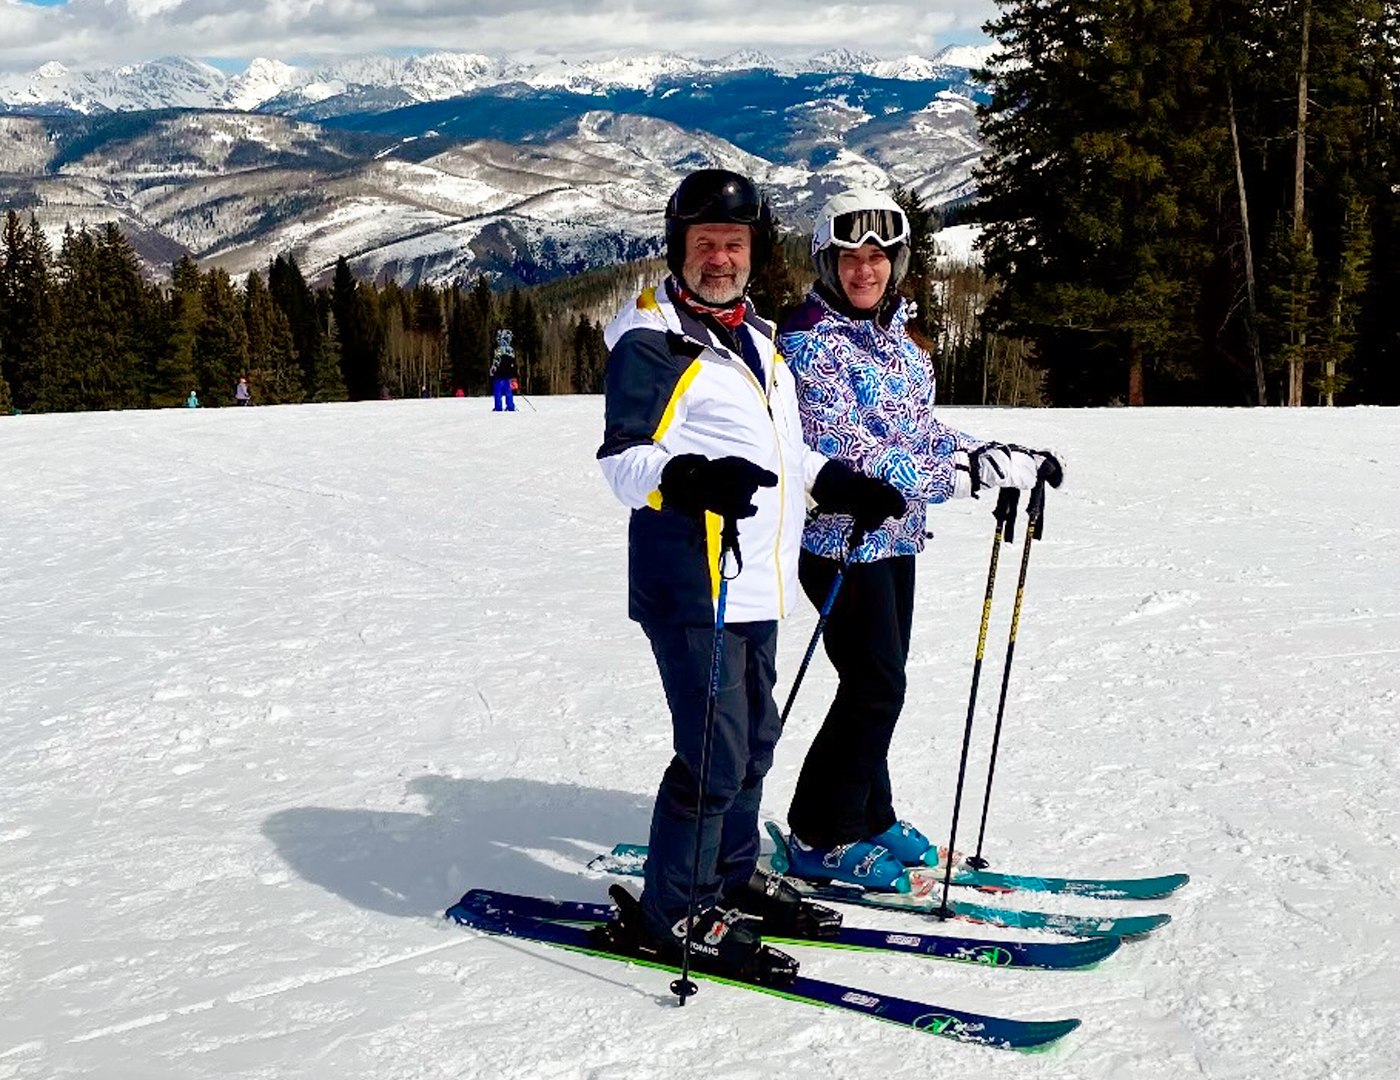 Dr Wilson and his wife nancy skiing